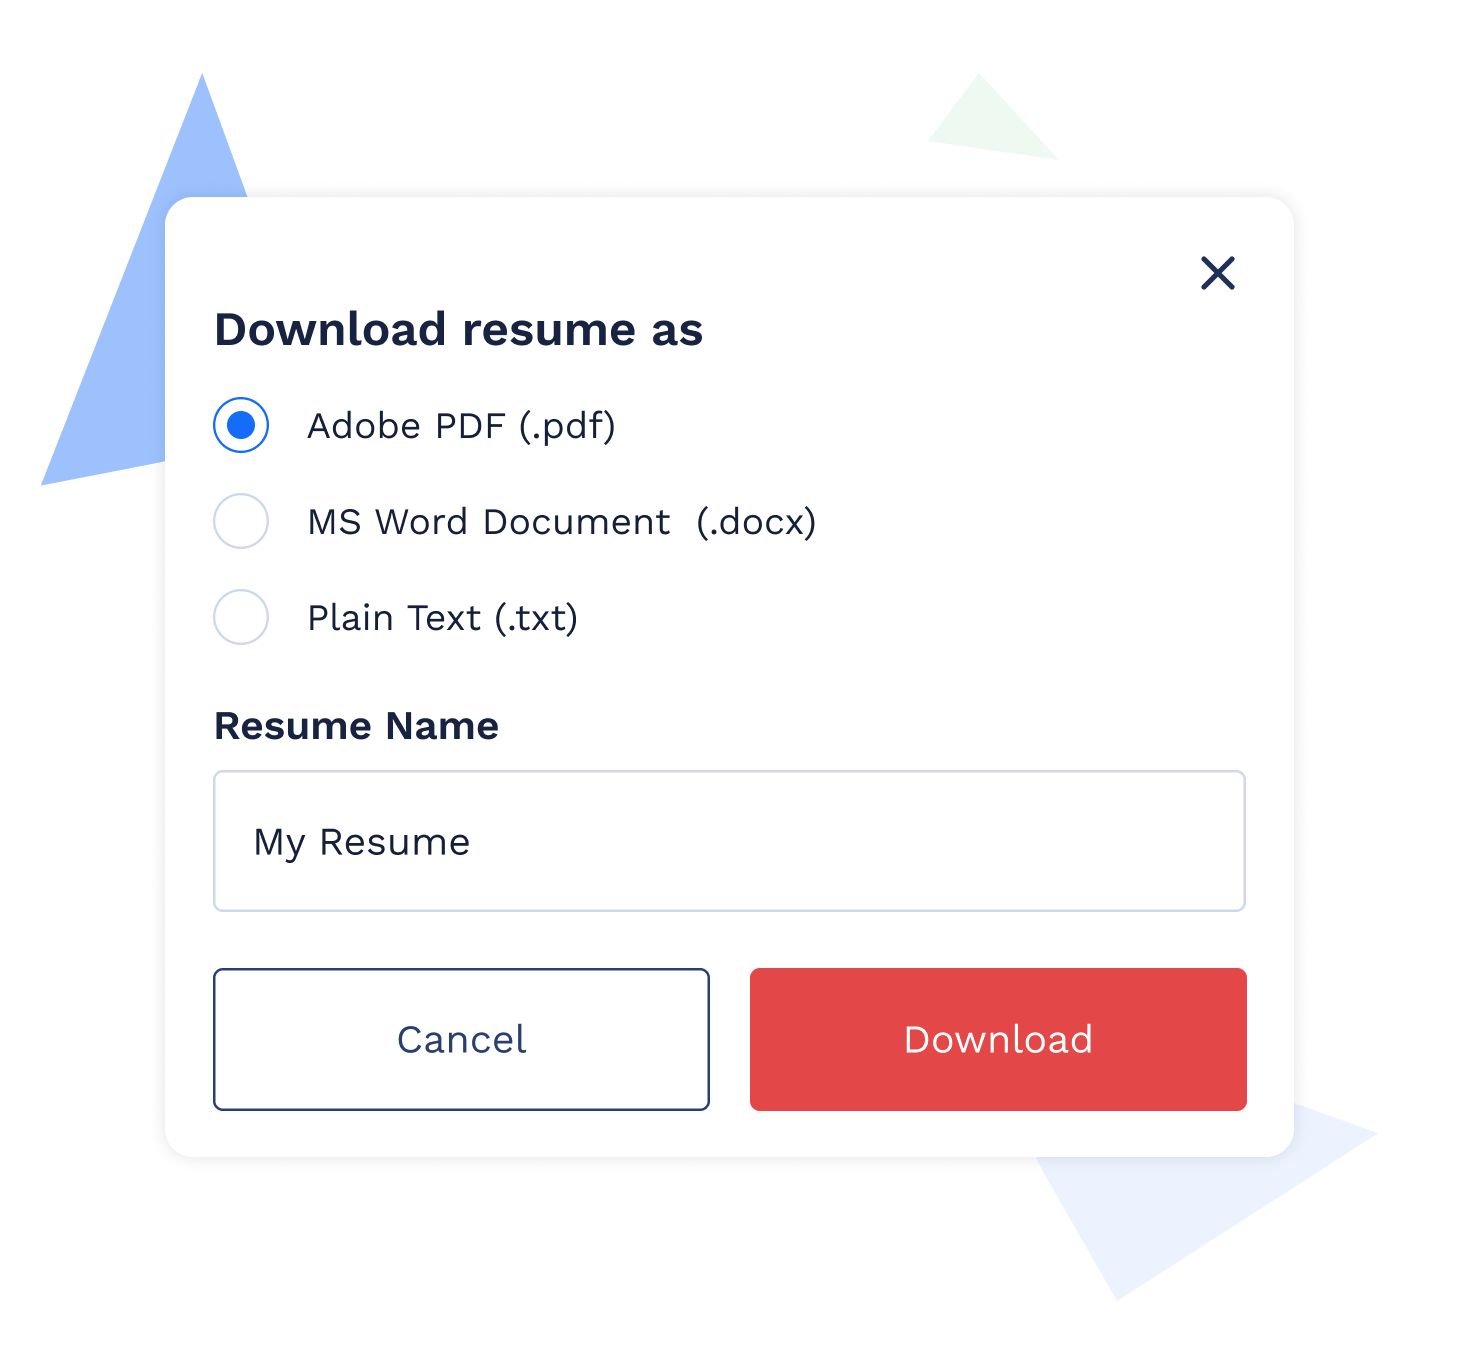 Resume builder PDF and Word download feature